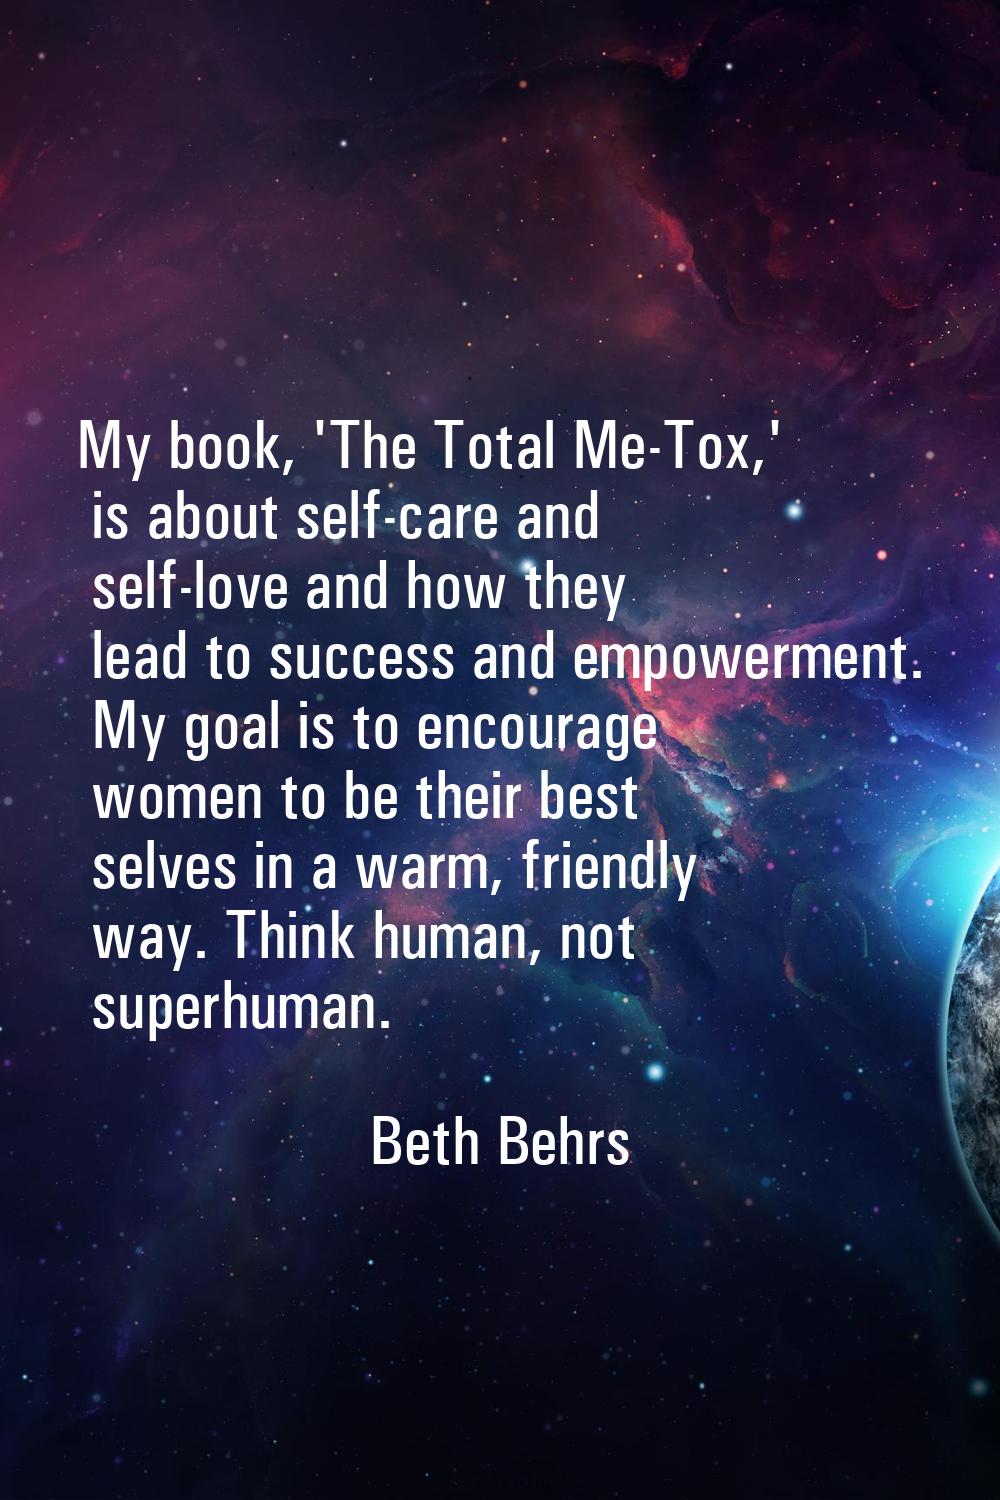 My book, 'The Total Me-Tox,' is about self-care and self-love and how they lead to success and empo